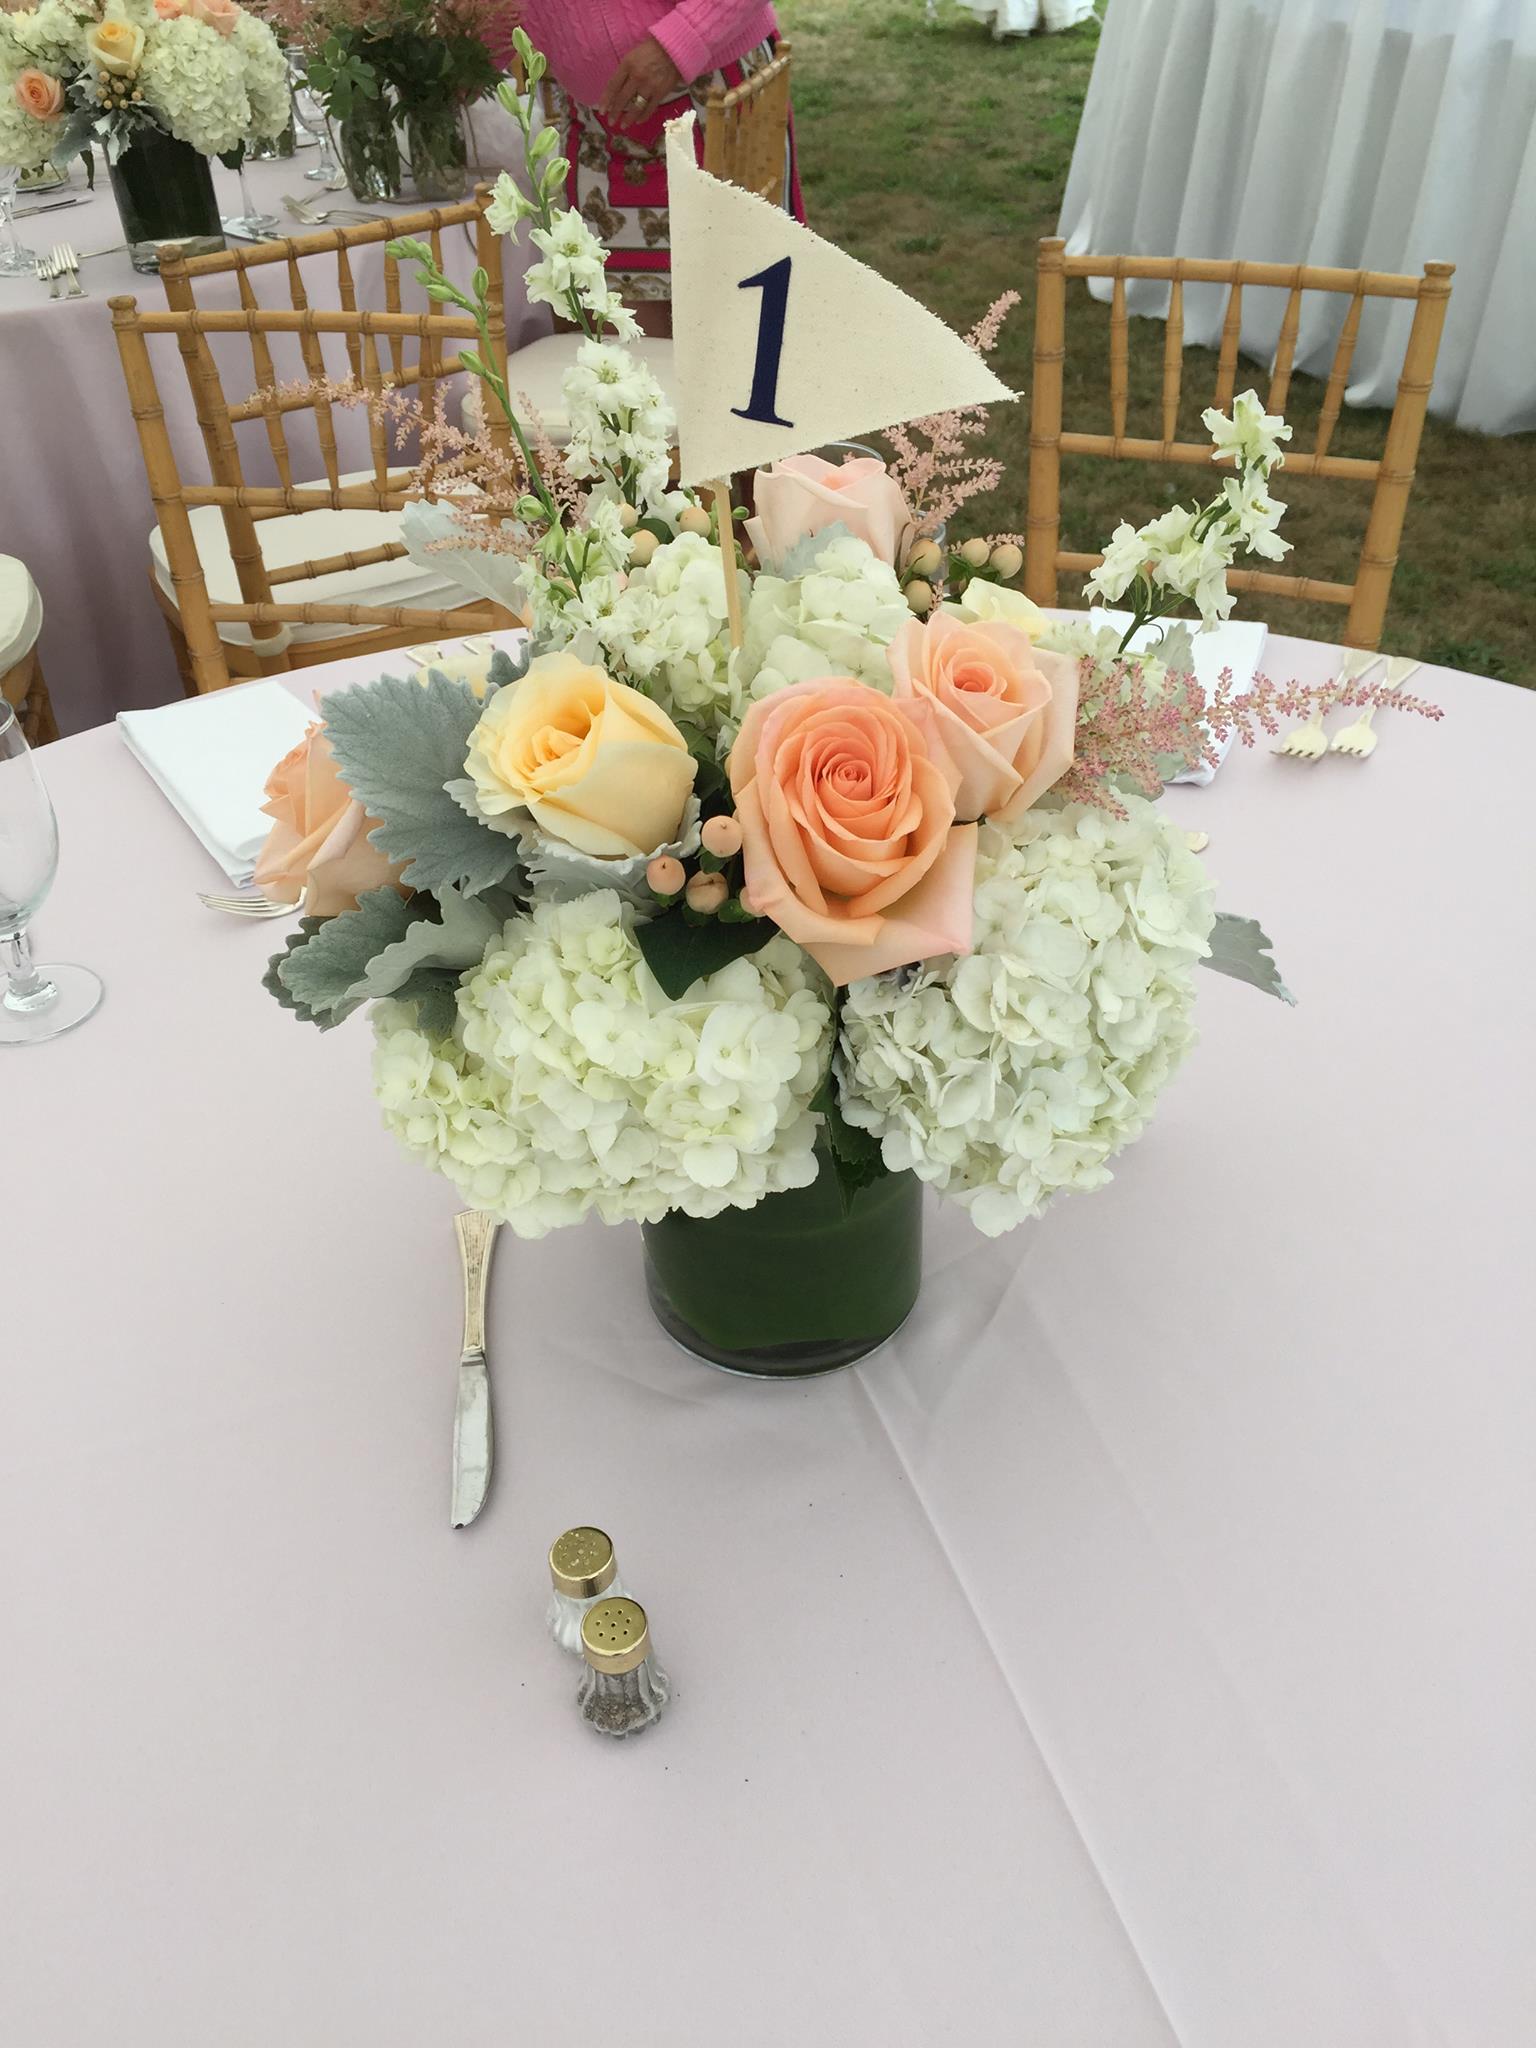 Pretty Wedding Centerpiece with Peach and Cream roses and White Hydrangea